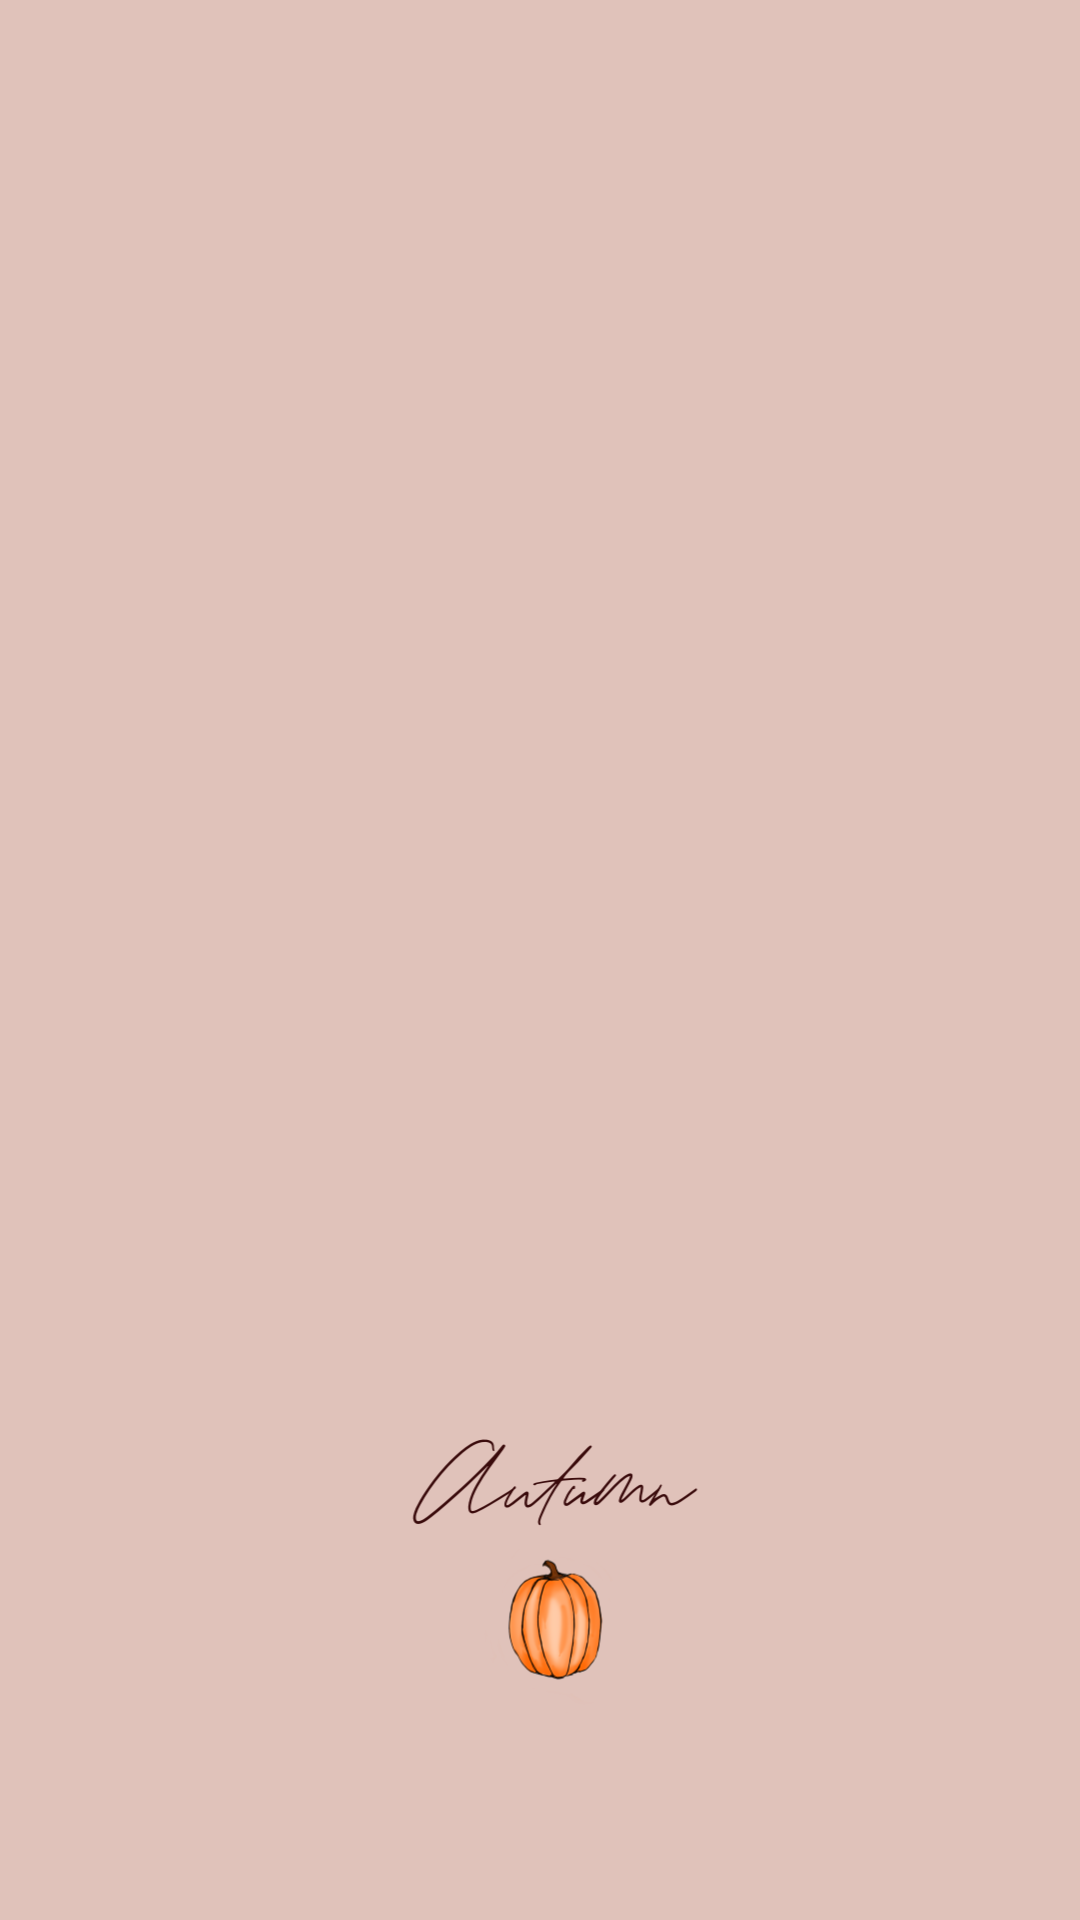 Free Phone Wallpaper, October Edition. iPhone wallpaper fall, Cute fall wallpaper, Fall wallpaper